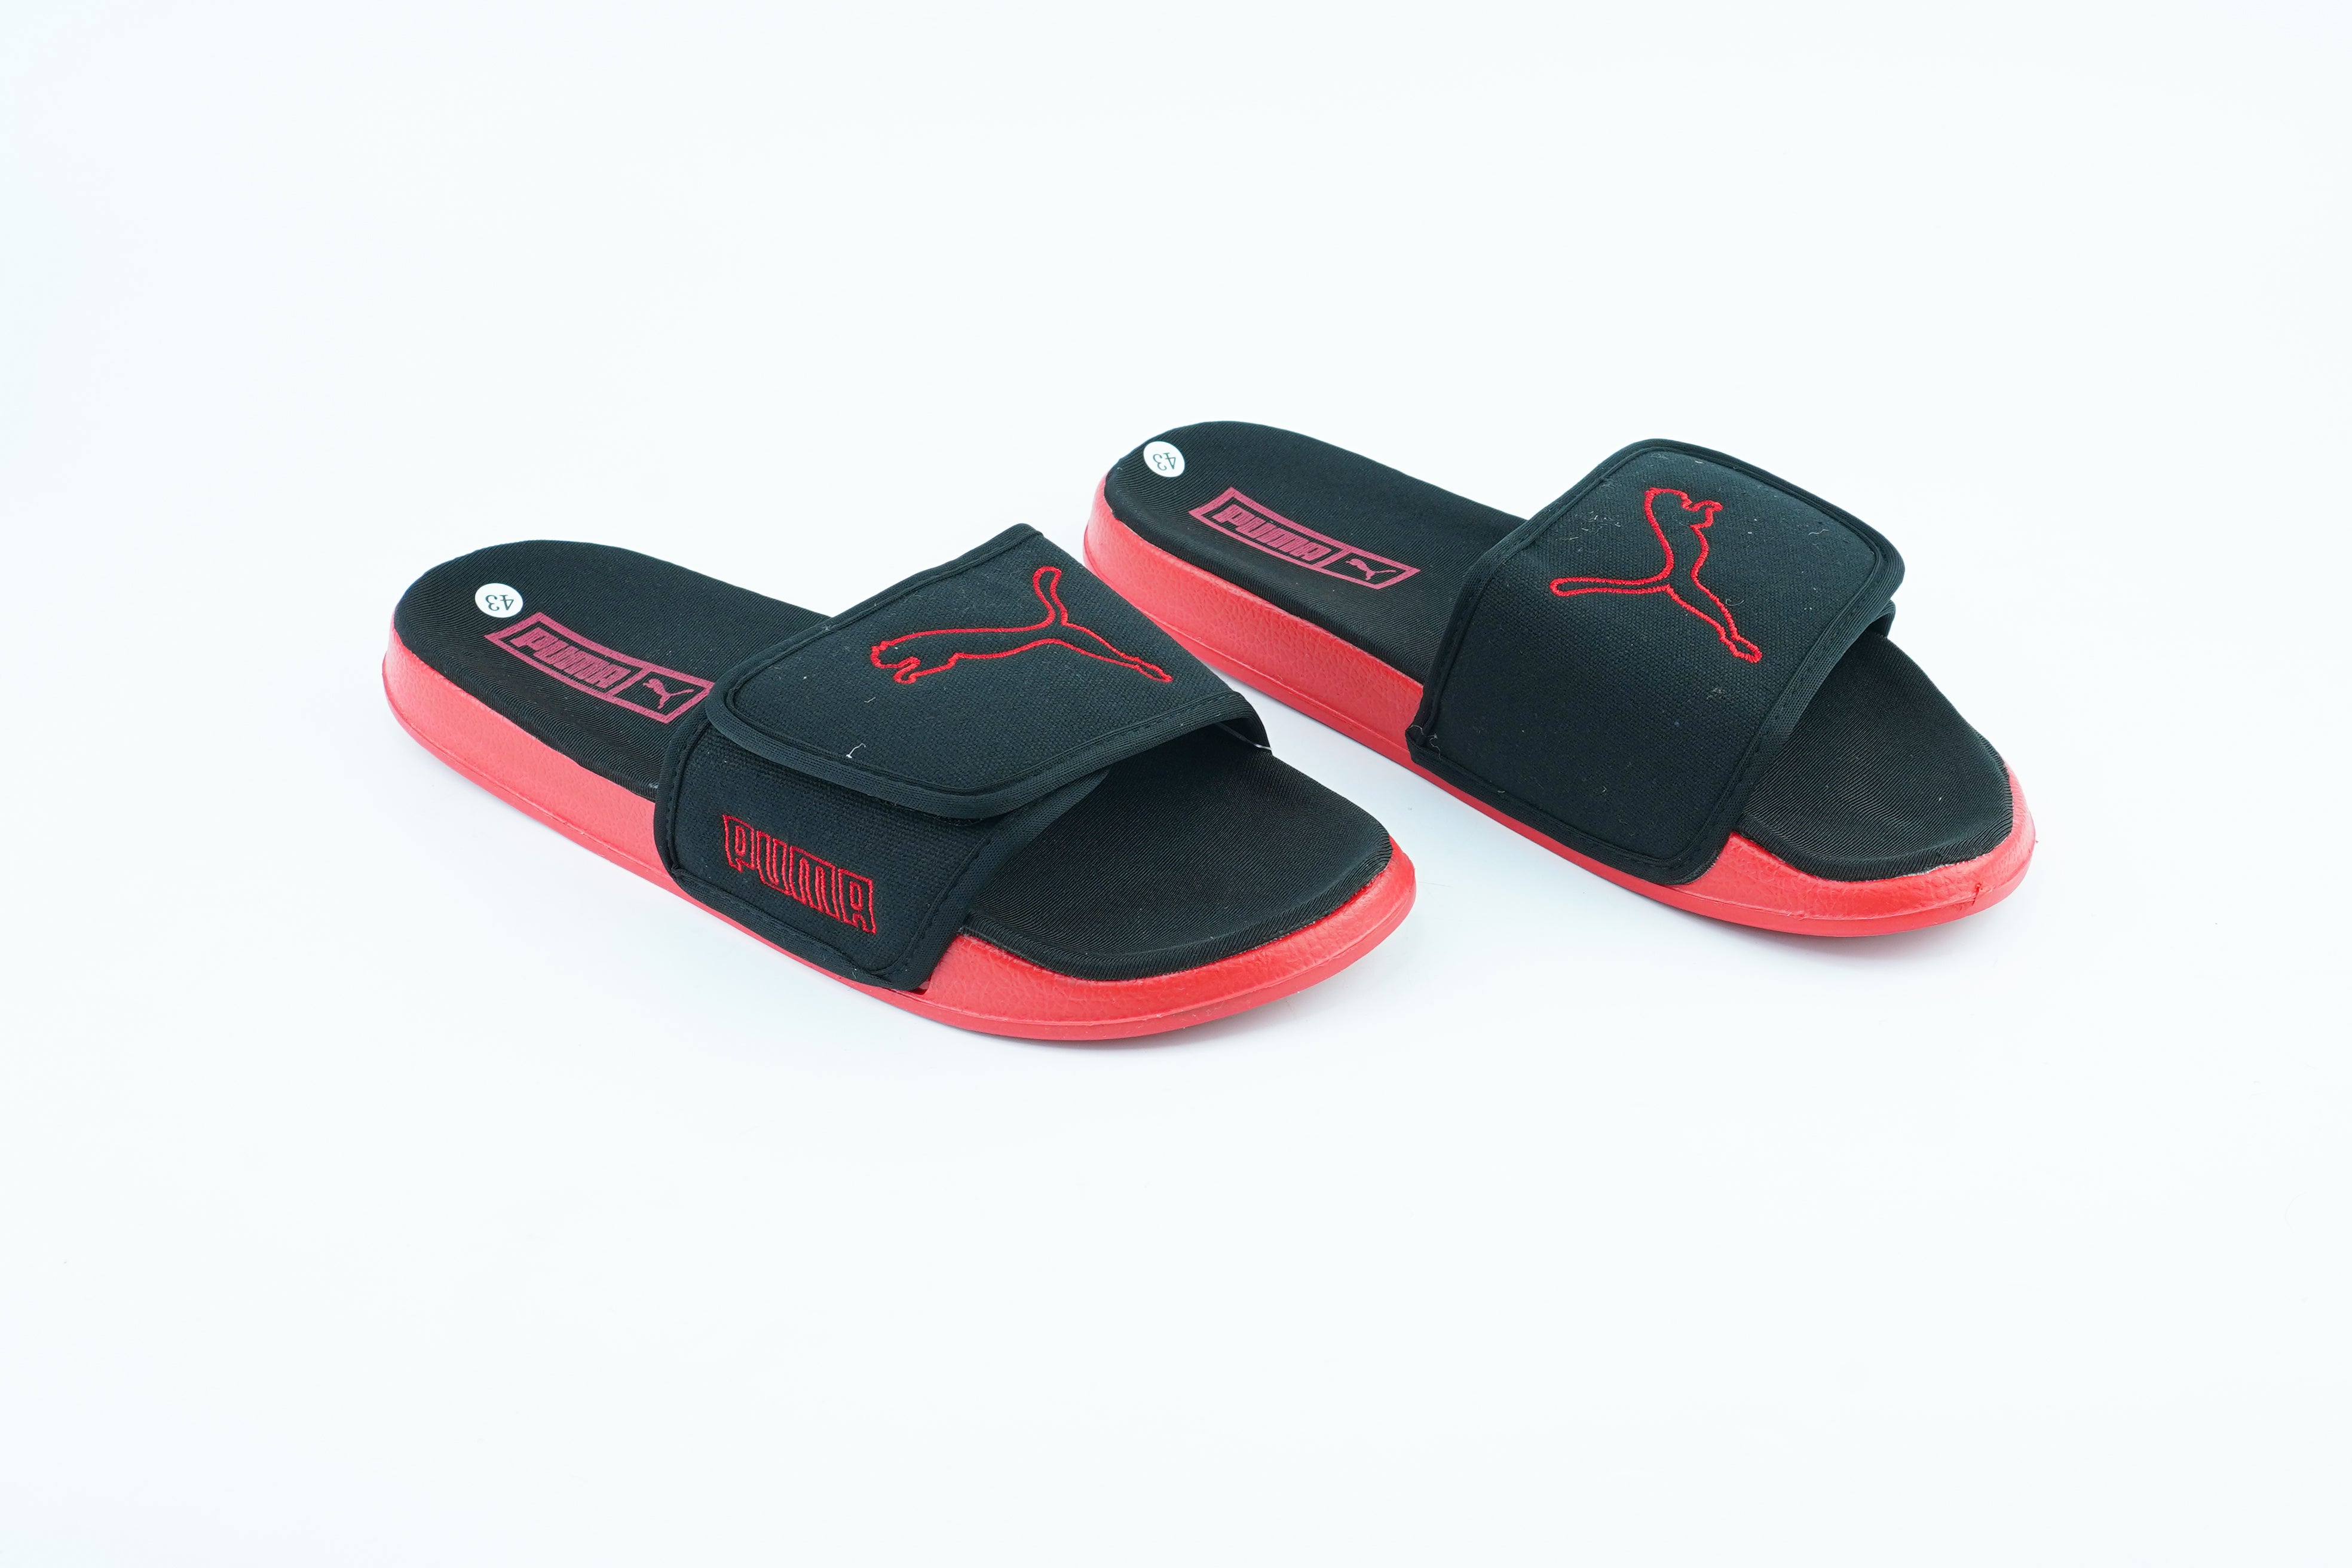 Adidas Adilette Comfort Slides for Women at the best price in Pakistan|  online shopping in Pakistan